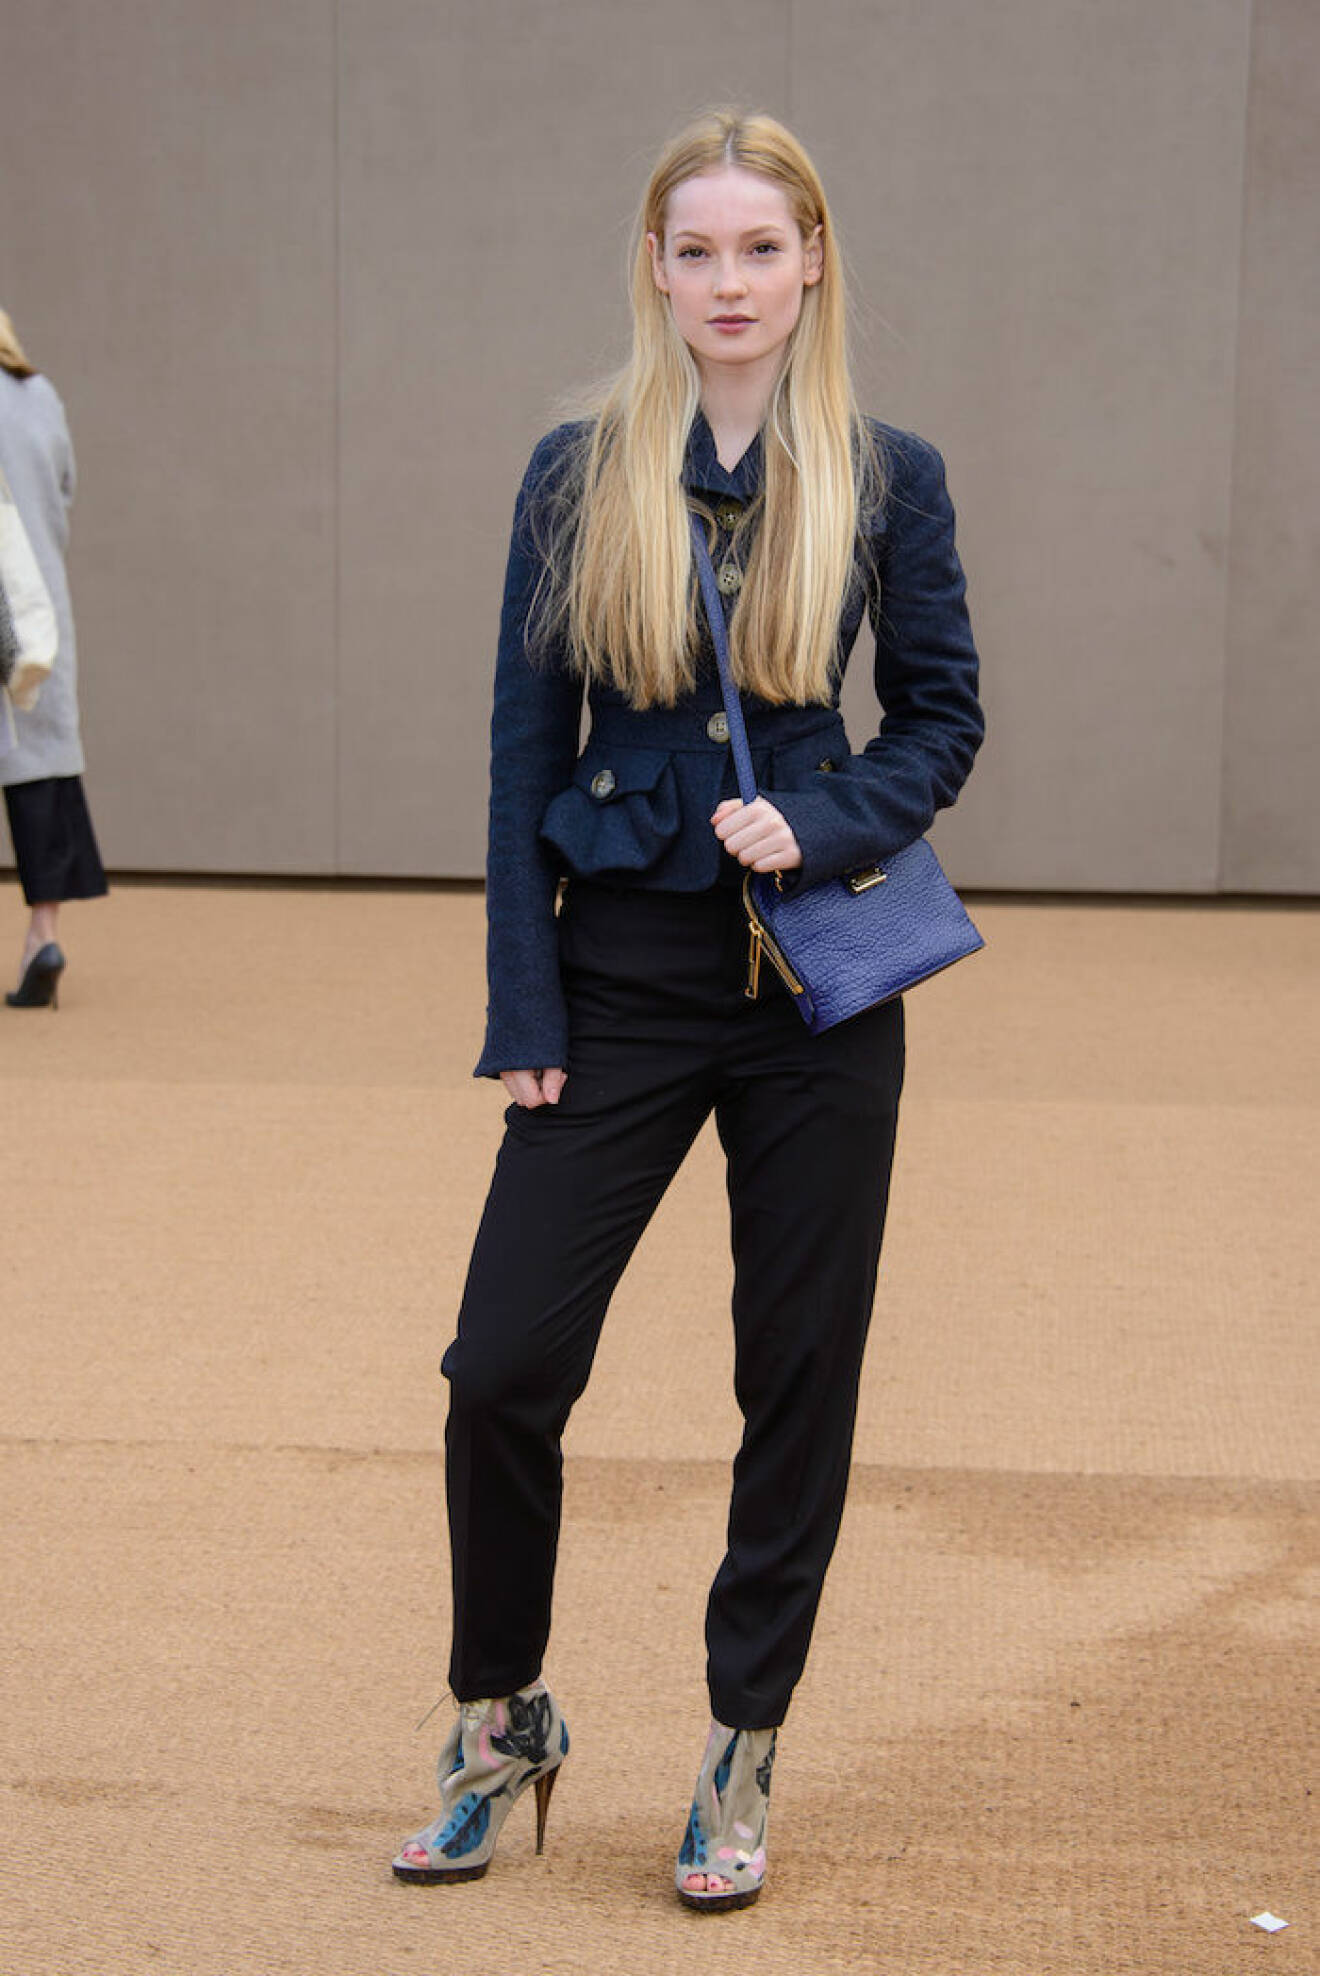 Laura Hayden attends the Burberry Prorsum AW 2015 Fashion show